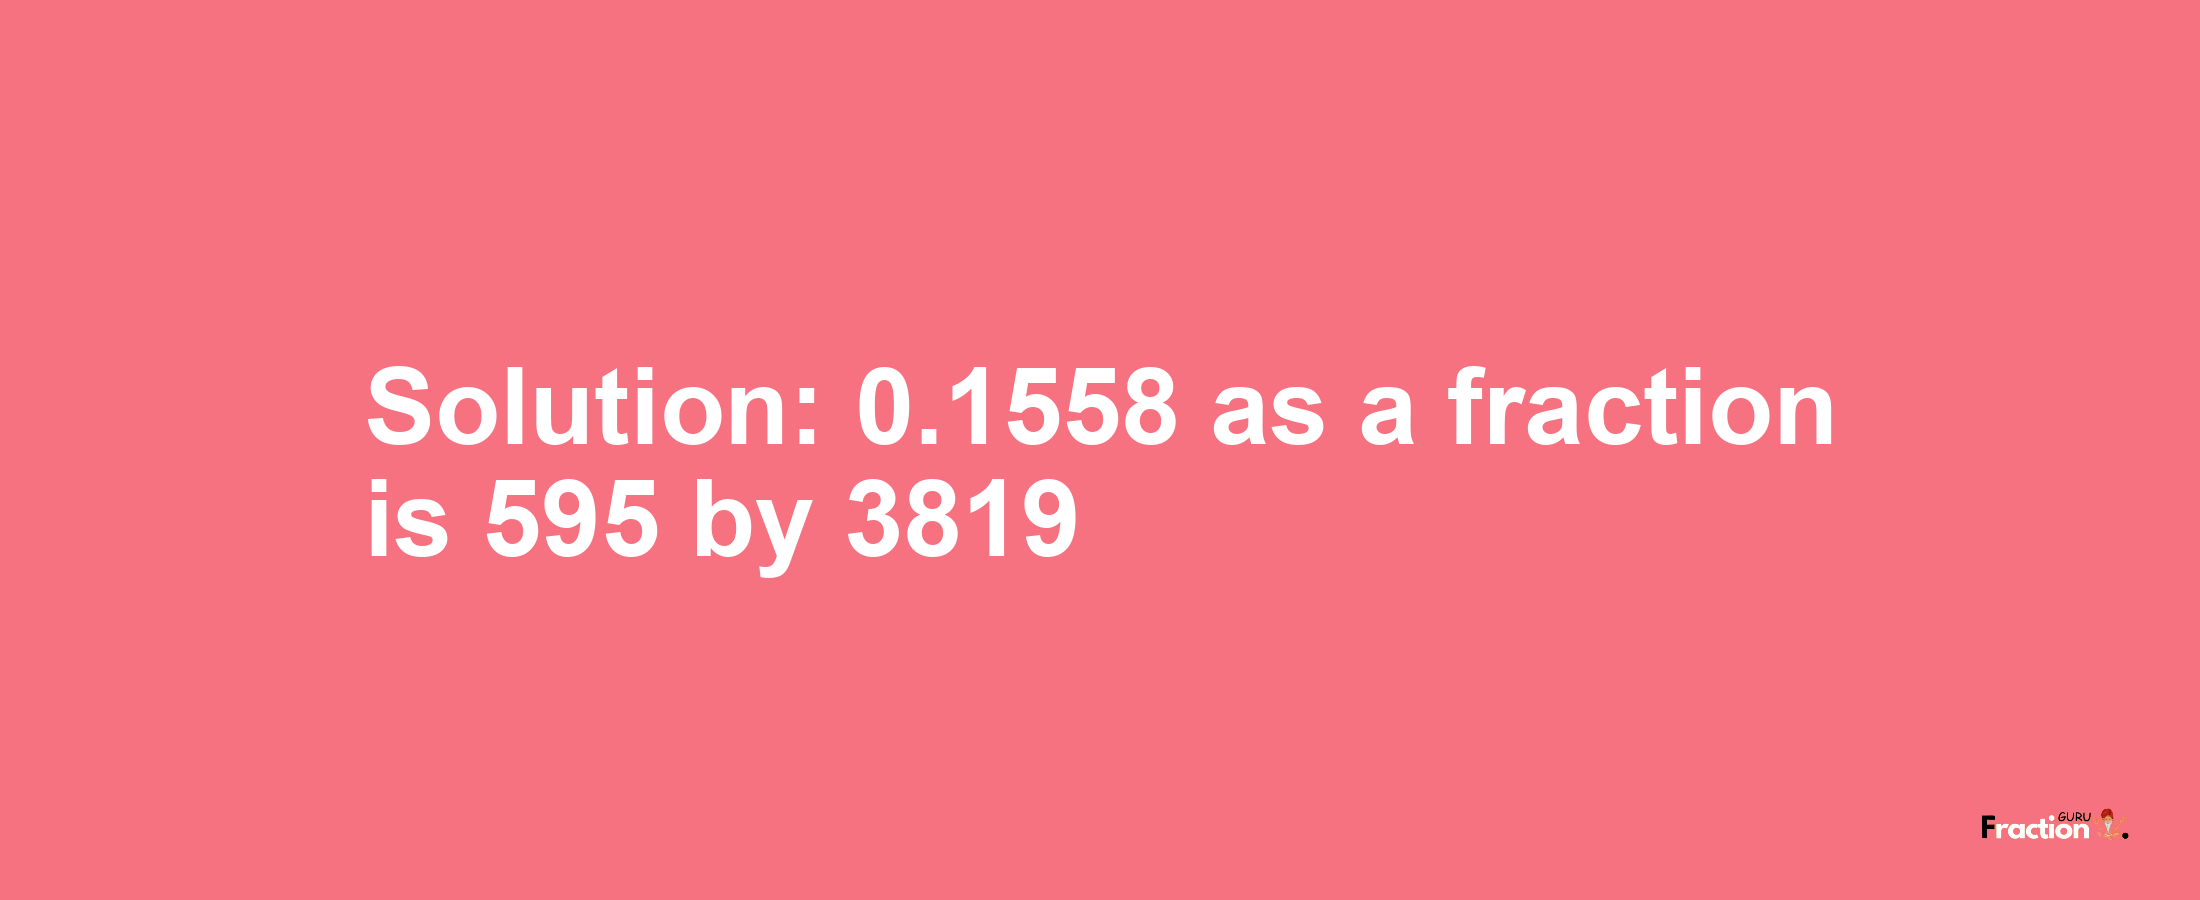 Solution:0.1558 as a fraction is 595/3819